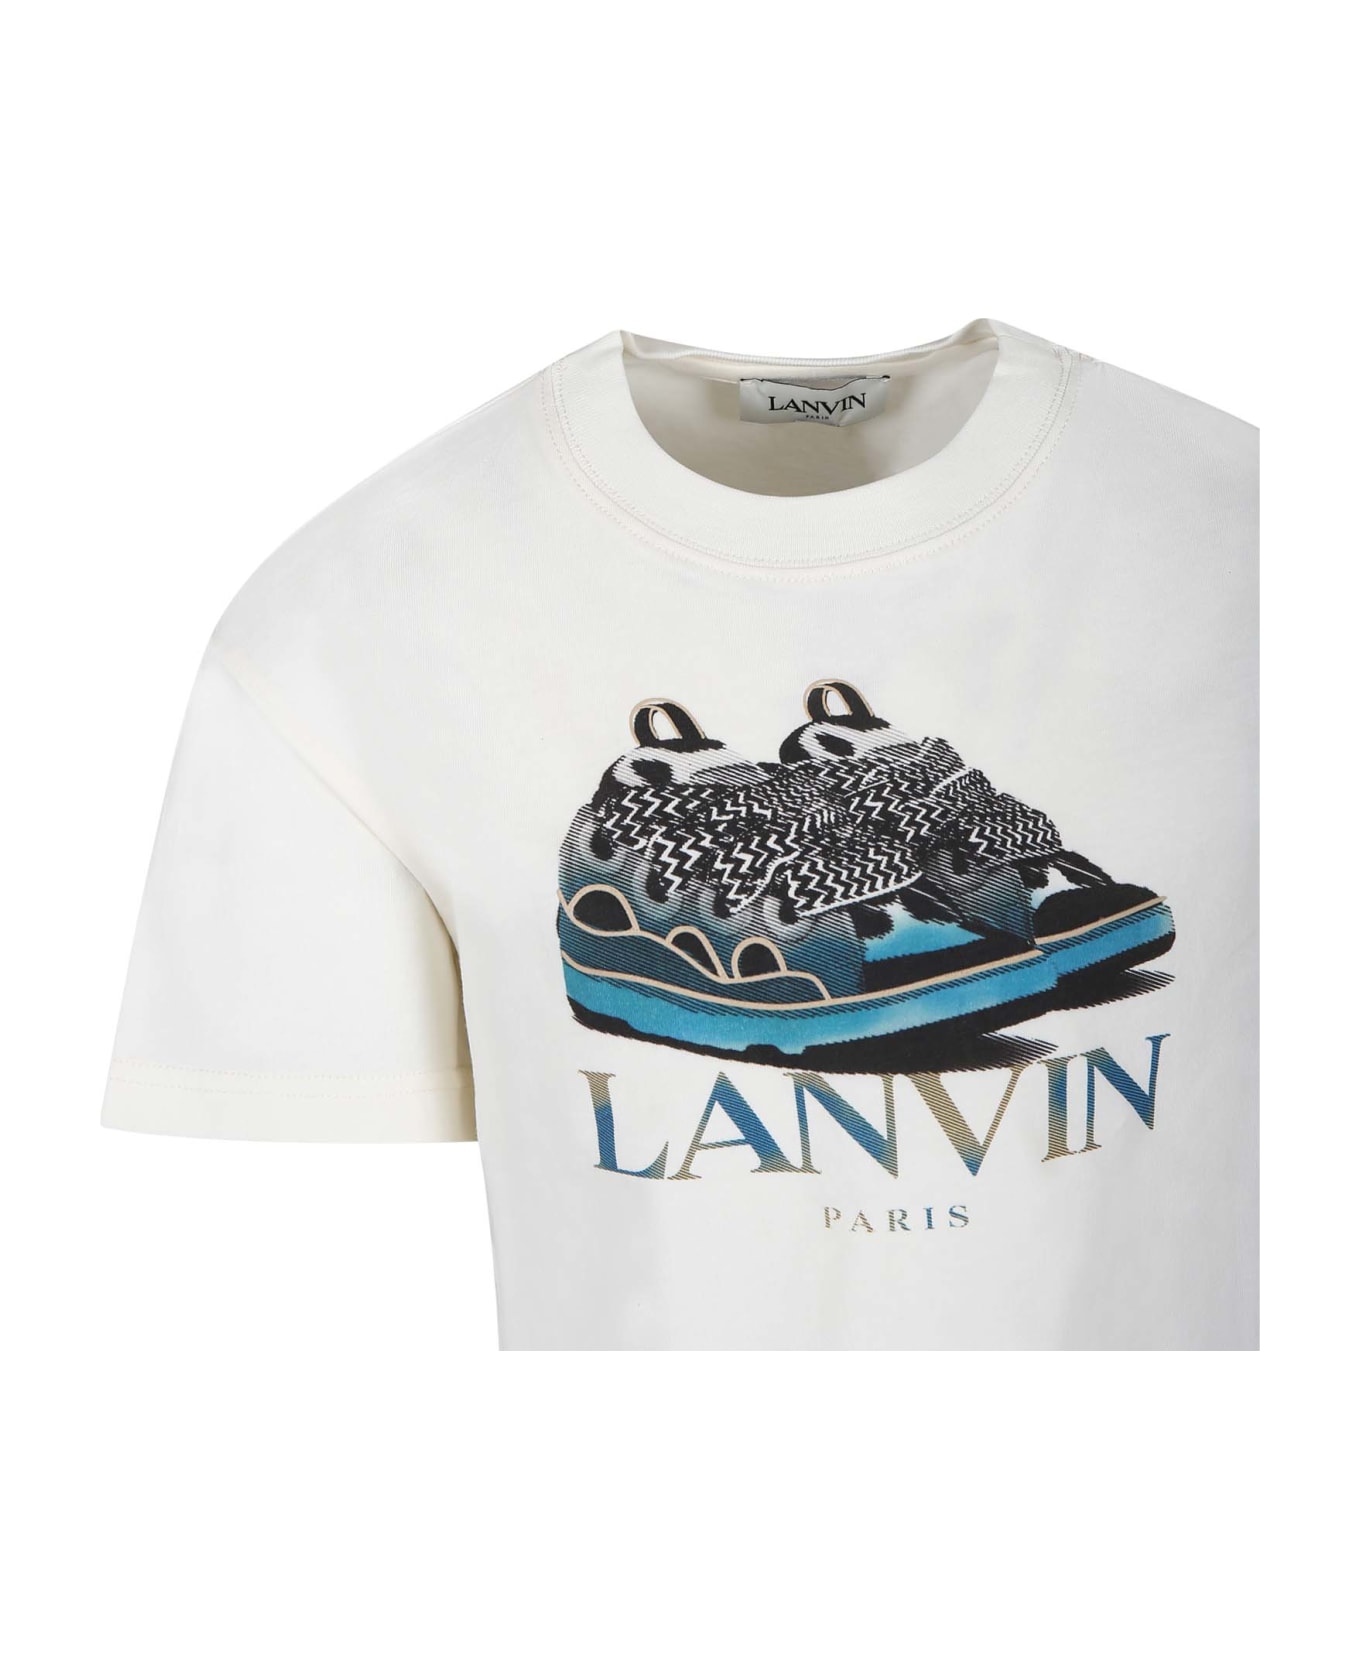 Lanvin Ivory T-shirt For Boy With Logo - Ivory